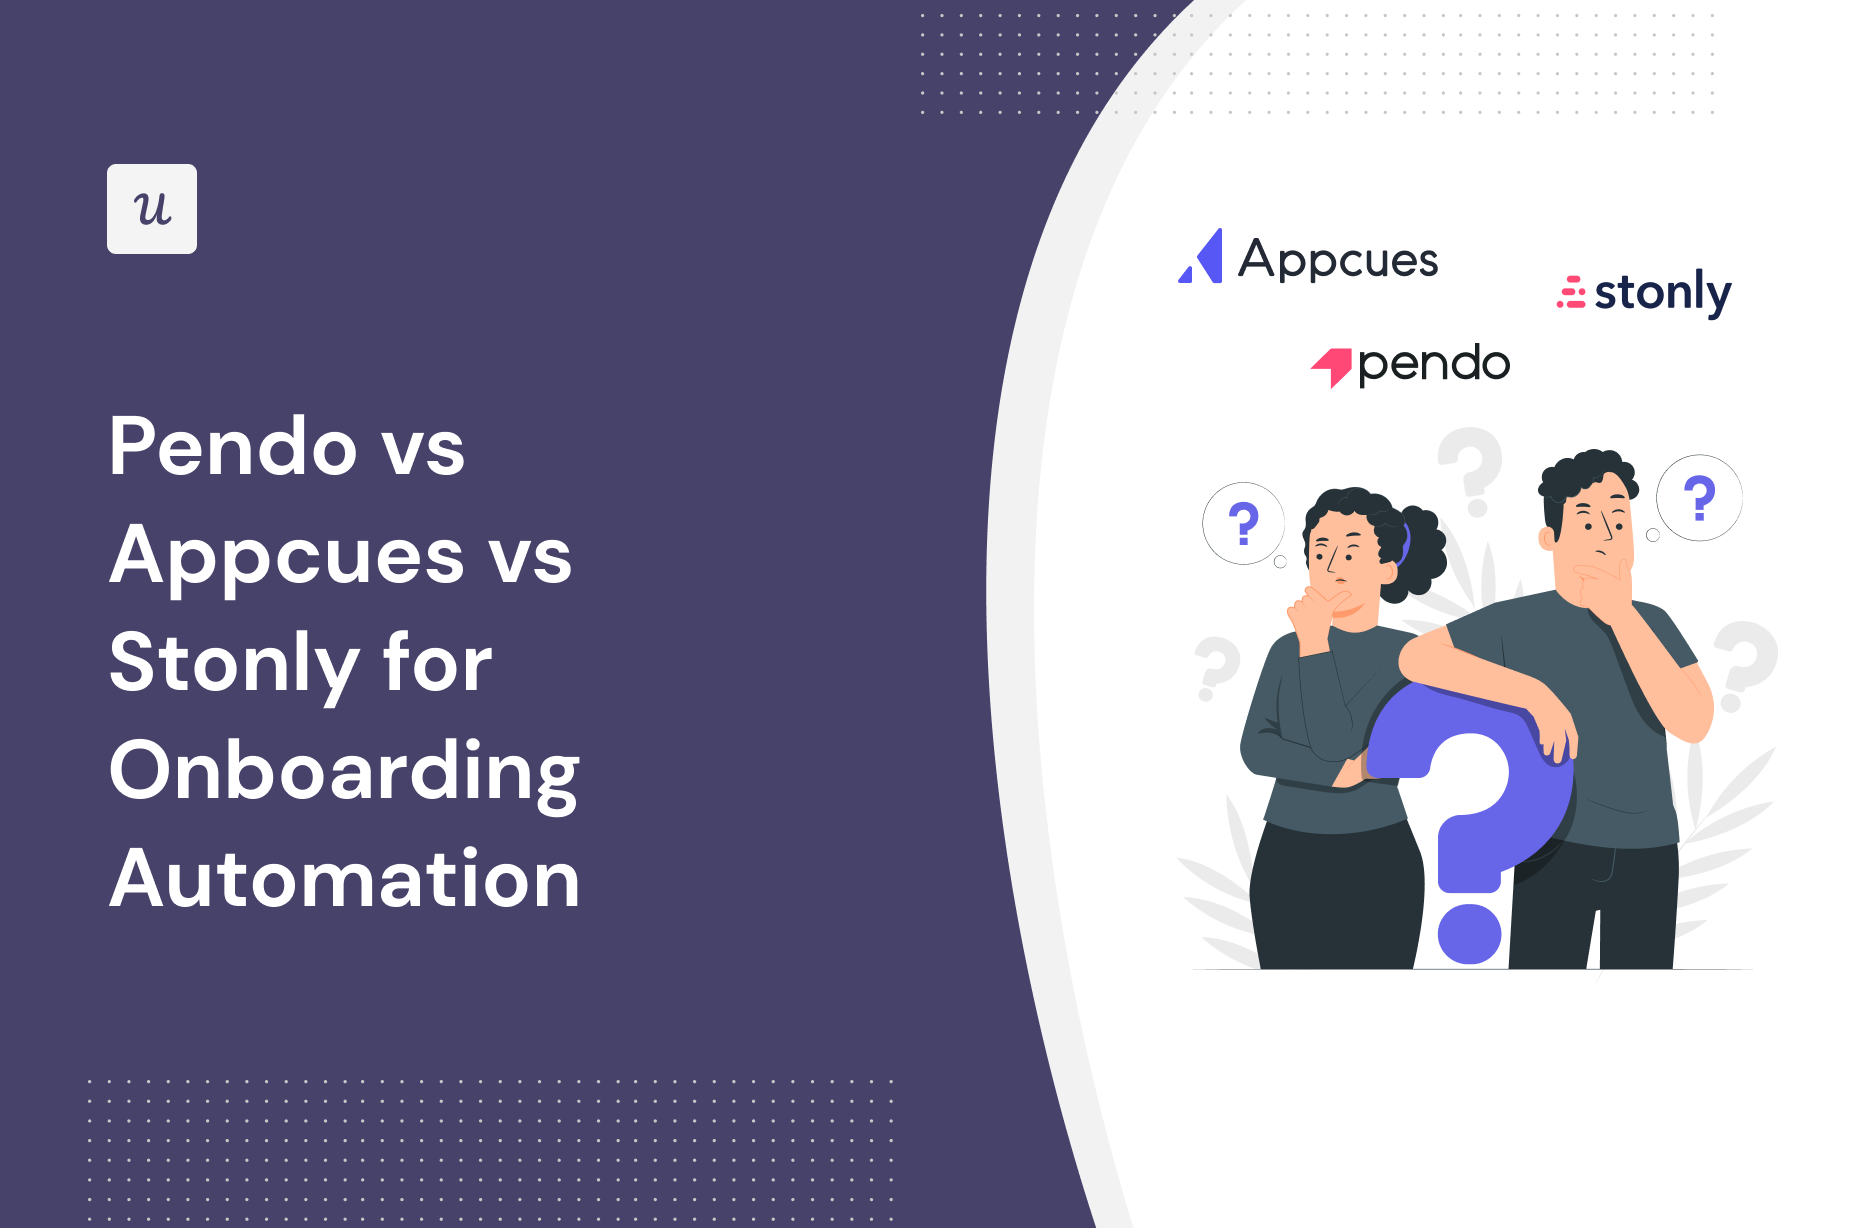 Pendo vs Appcues vs Stonly for Onboarding Automation